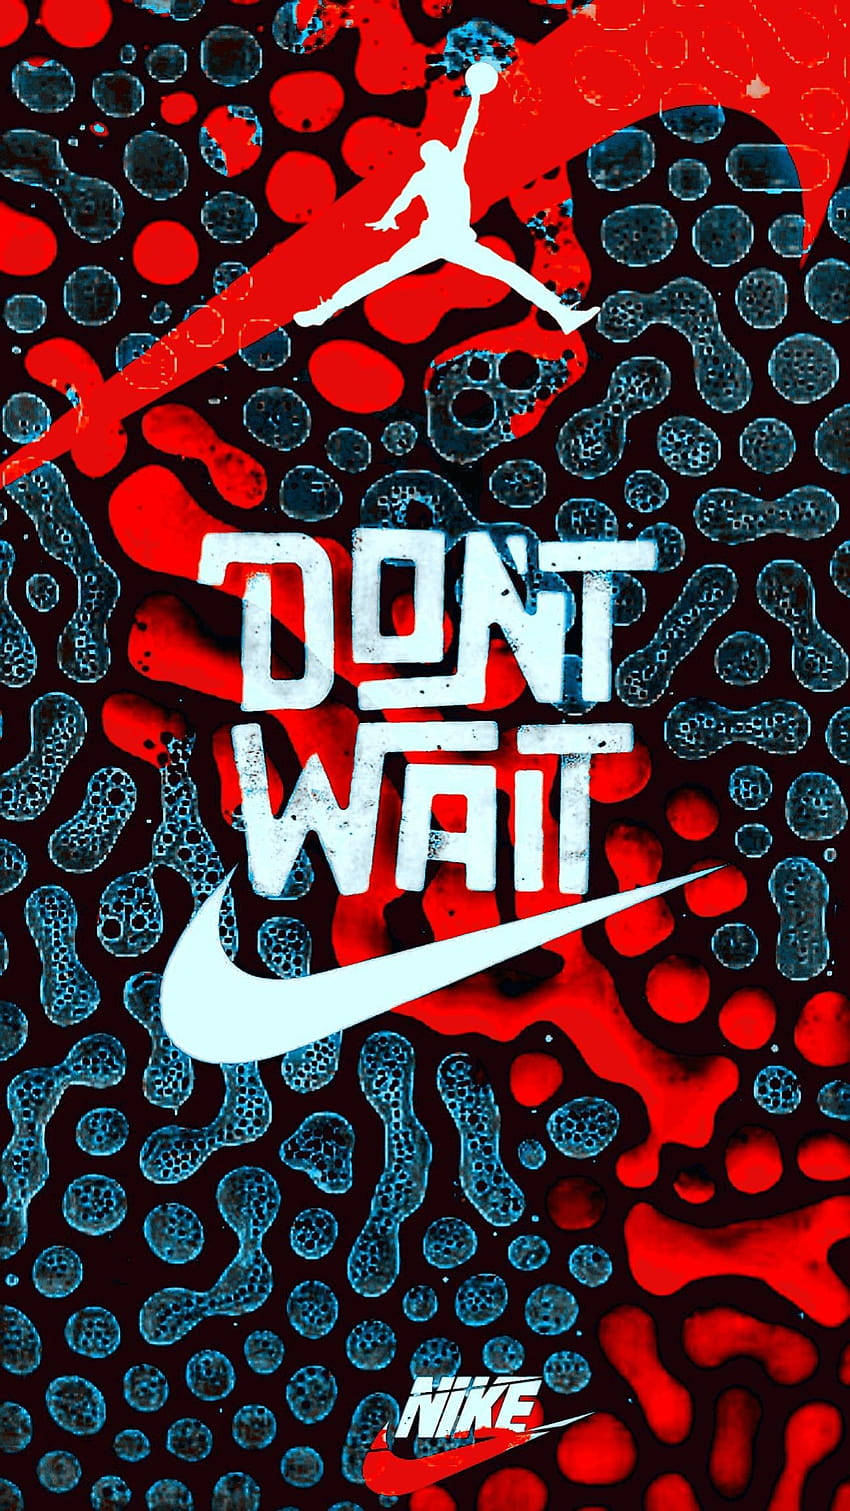 Nike Just Do It Wallpapers 73 images